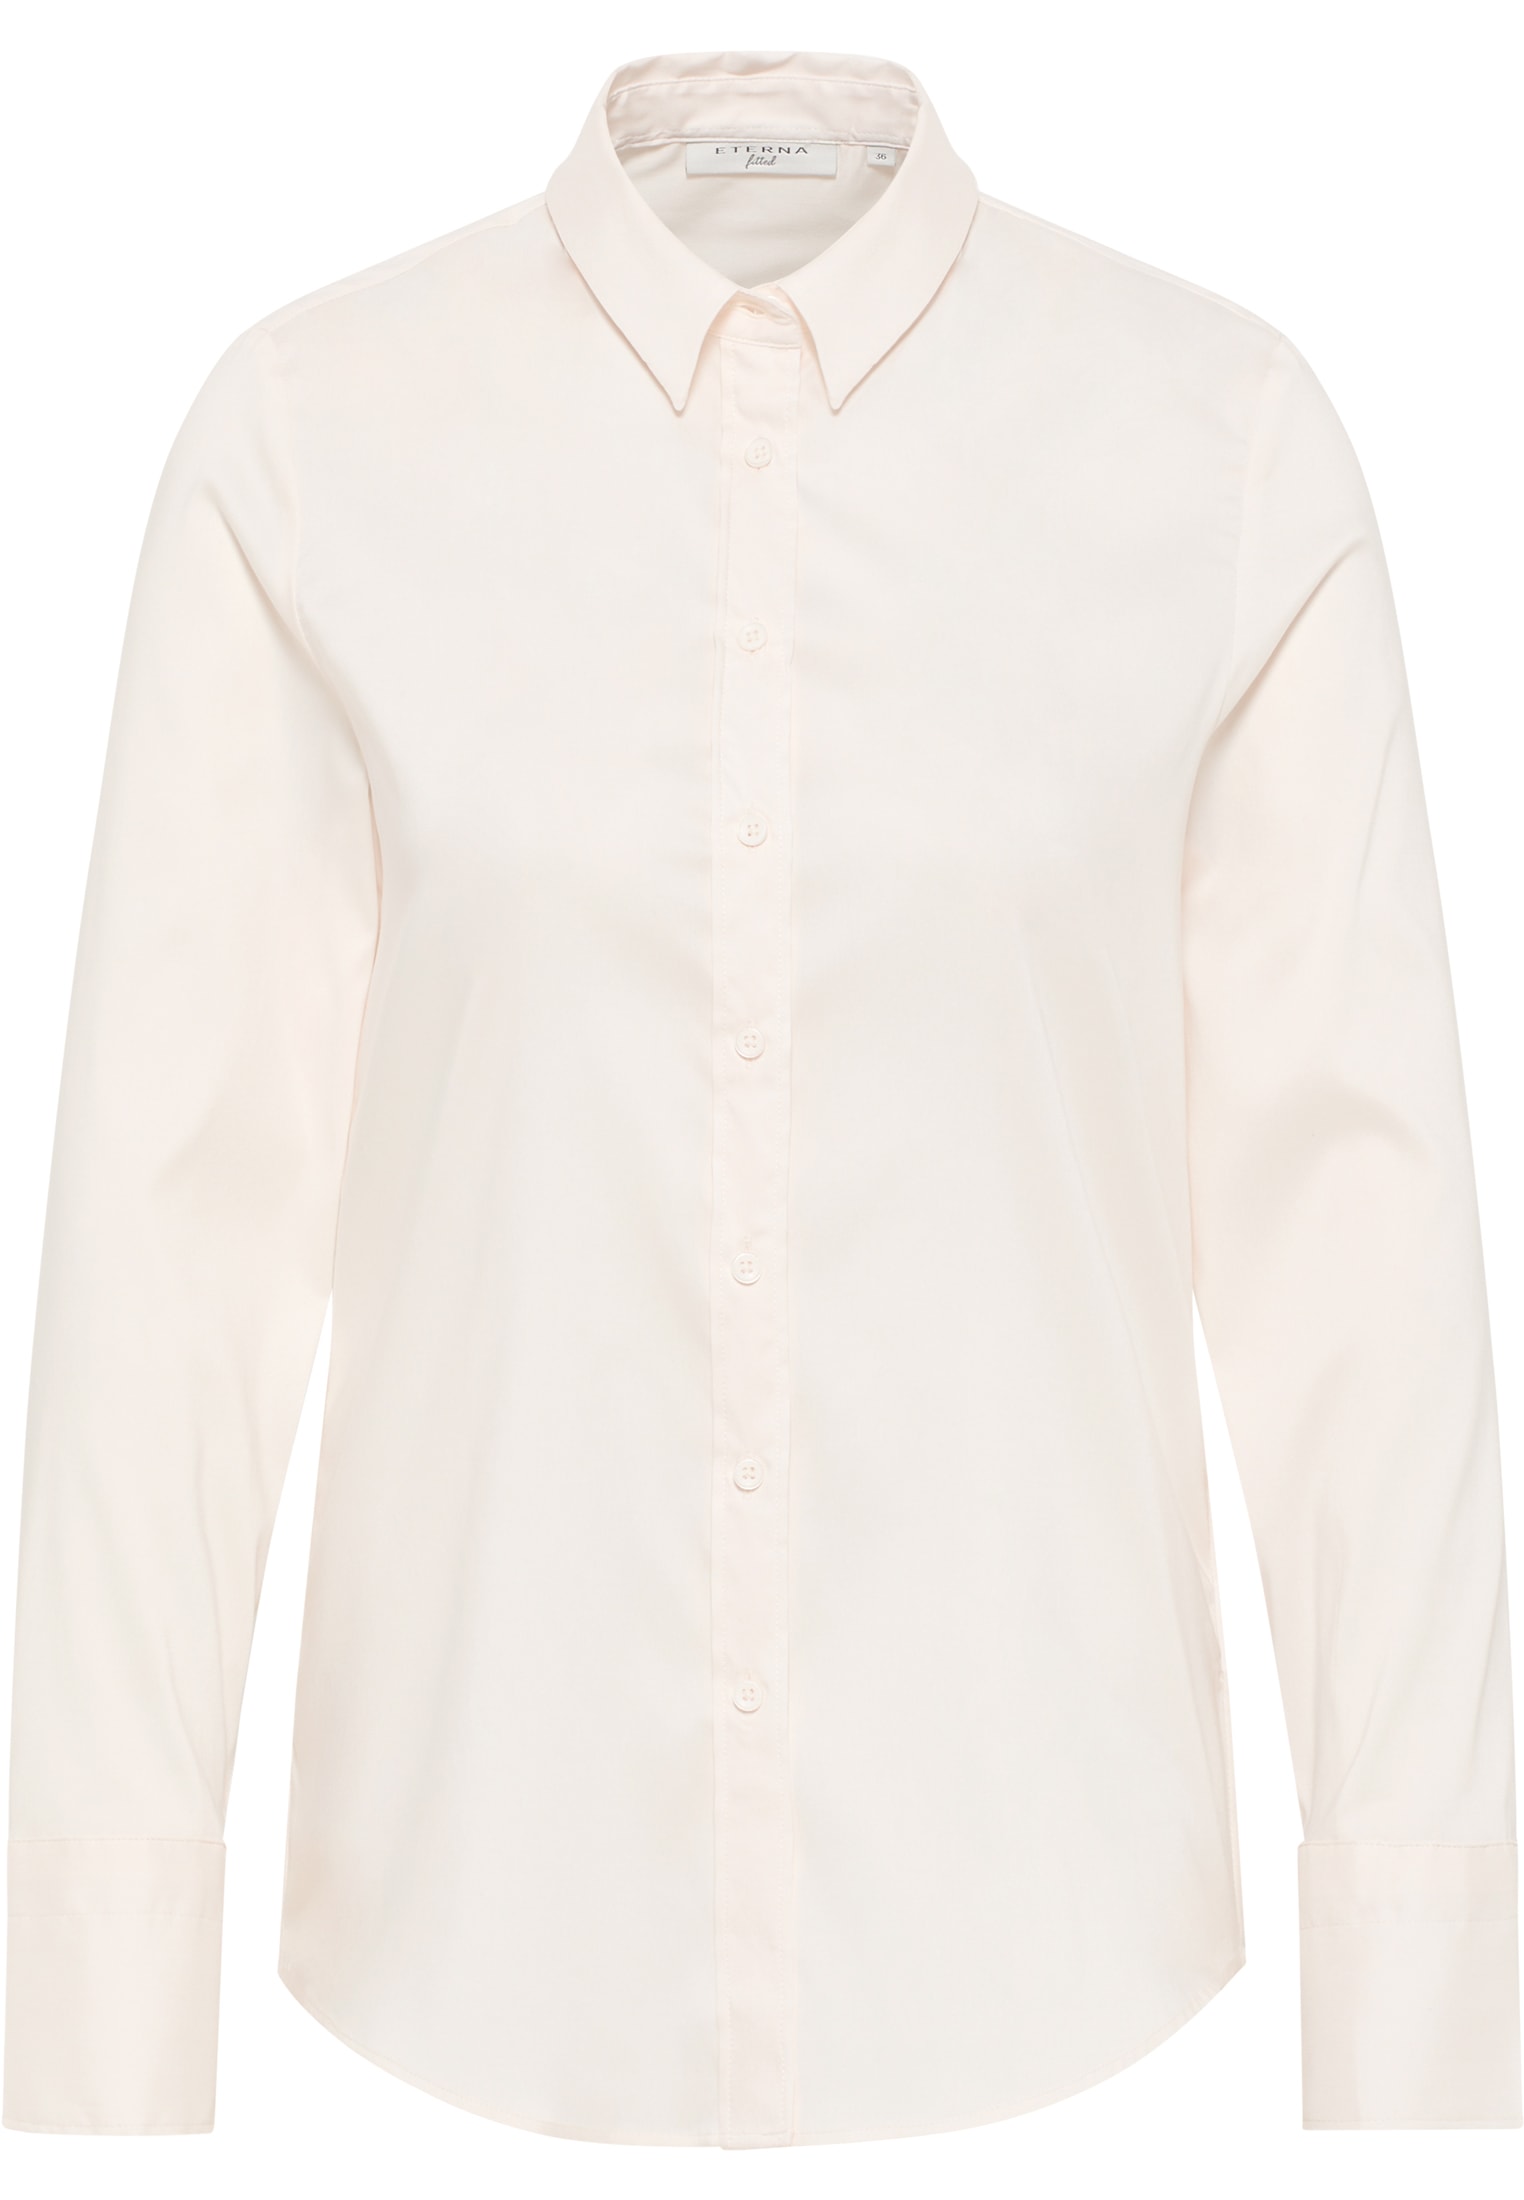 Performance Shirt Bluse in off-white unifarben | off-white | Langarm | 38 |  2BL00441-00-02-38-1/1